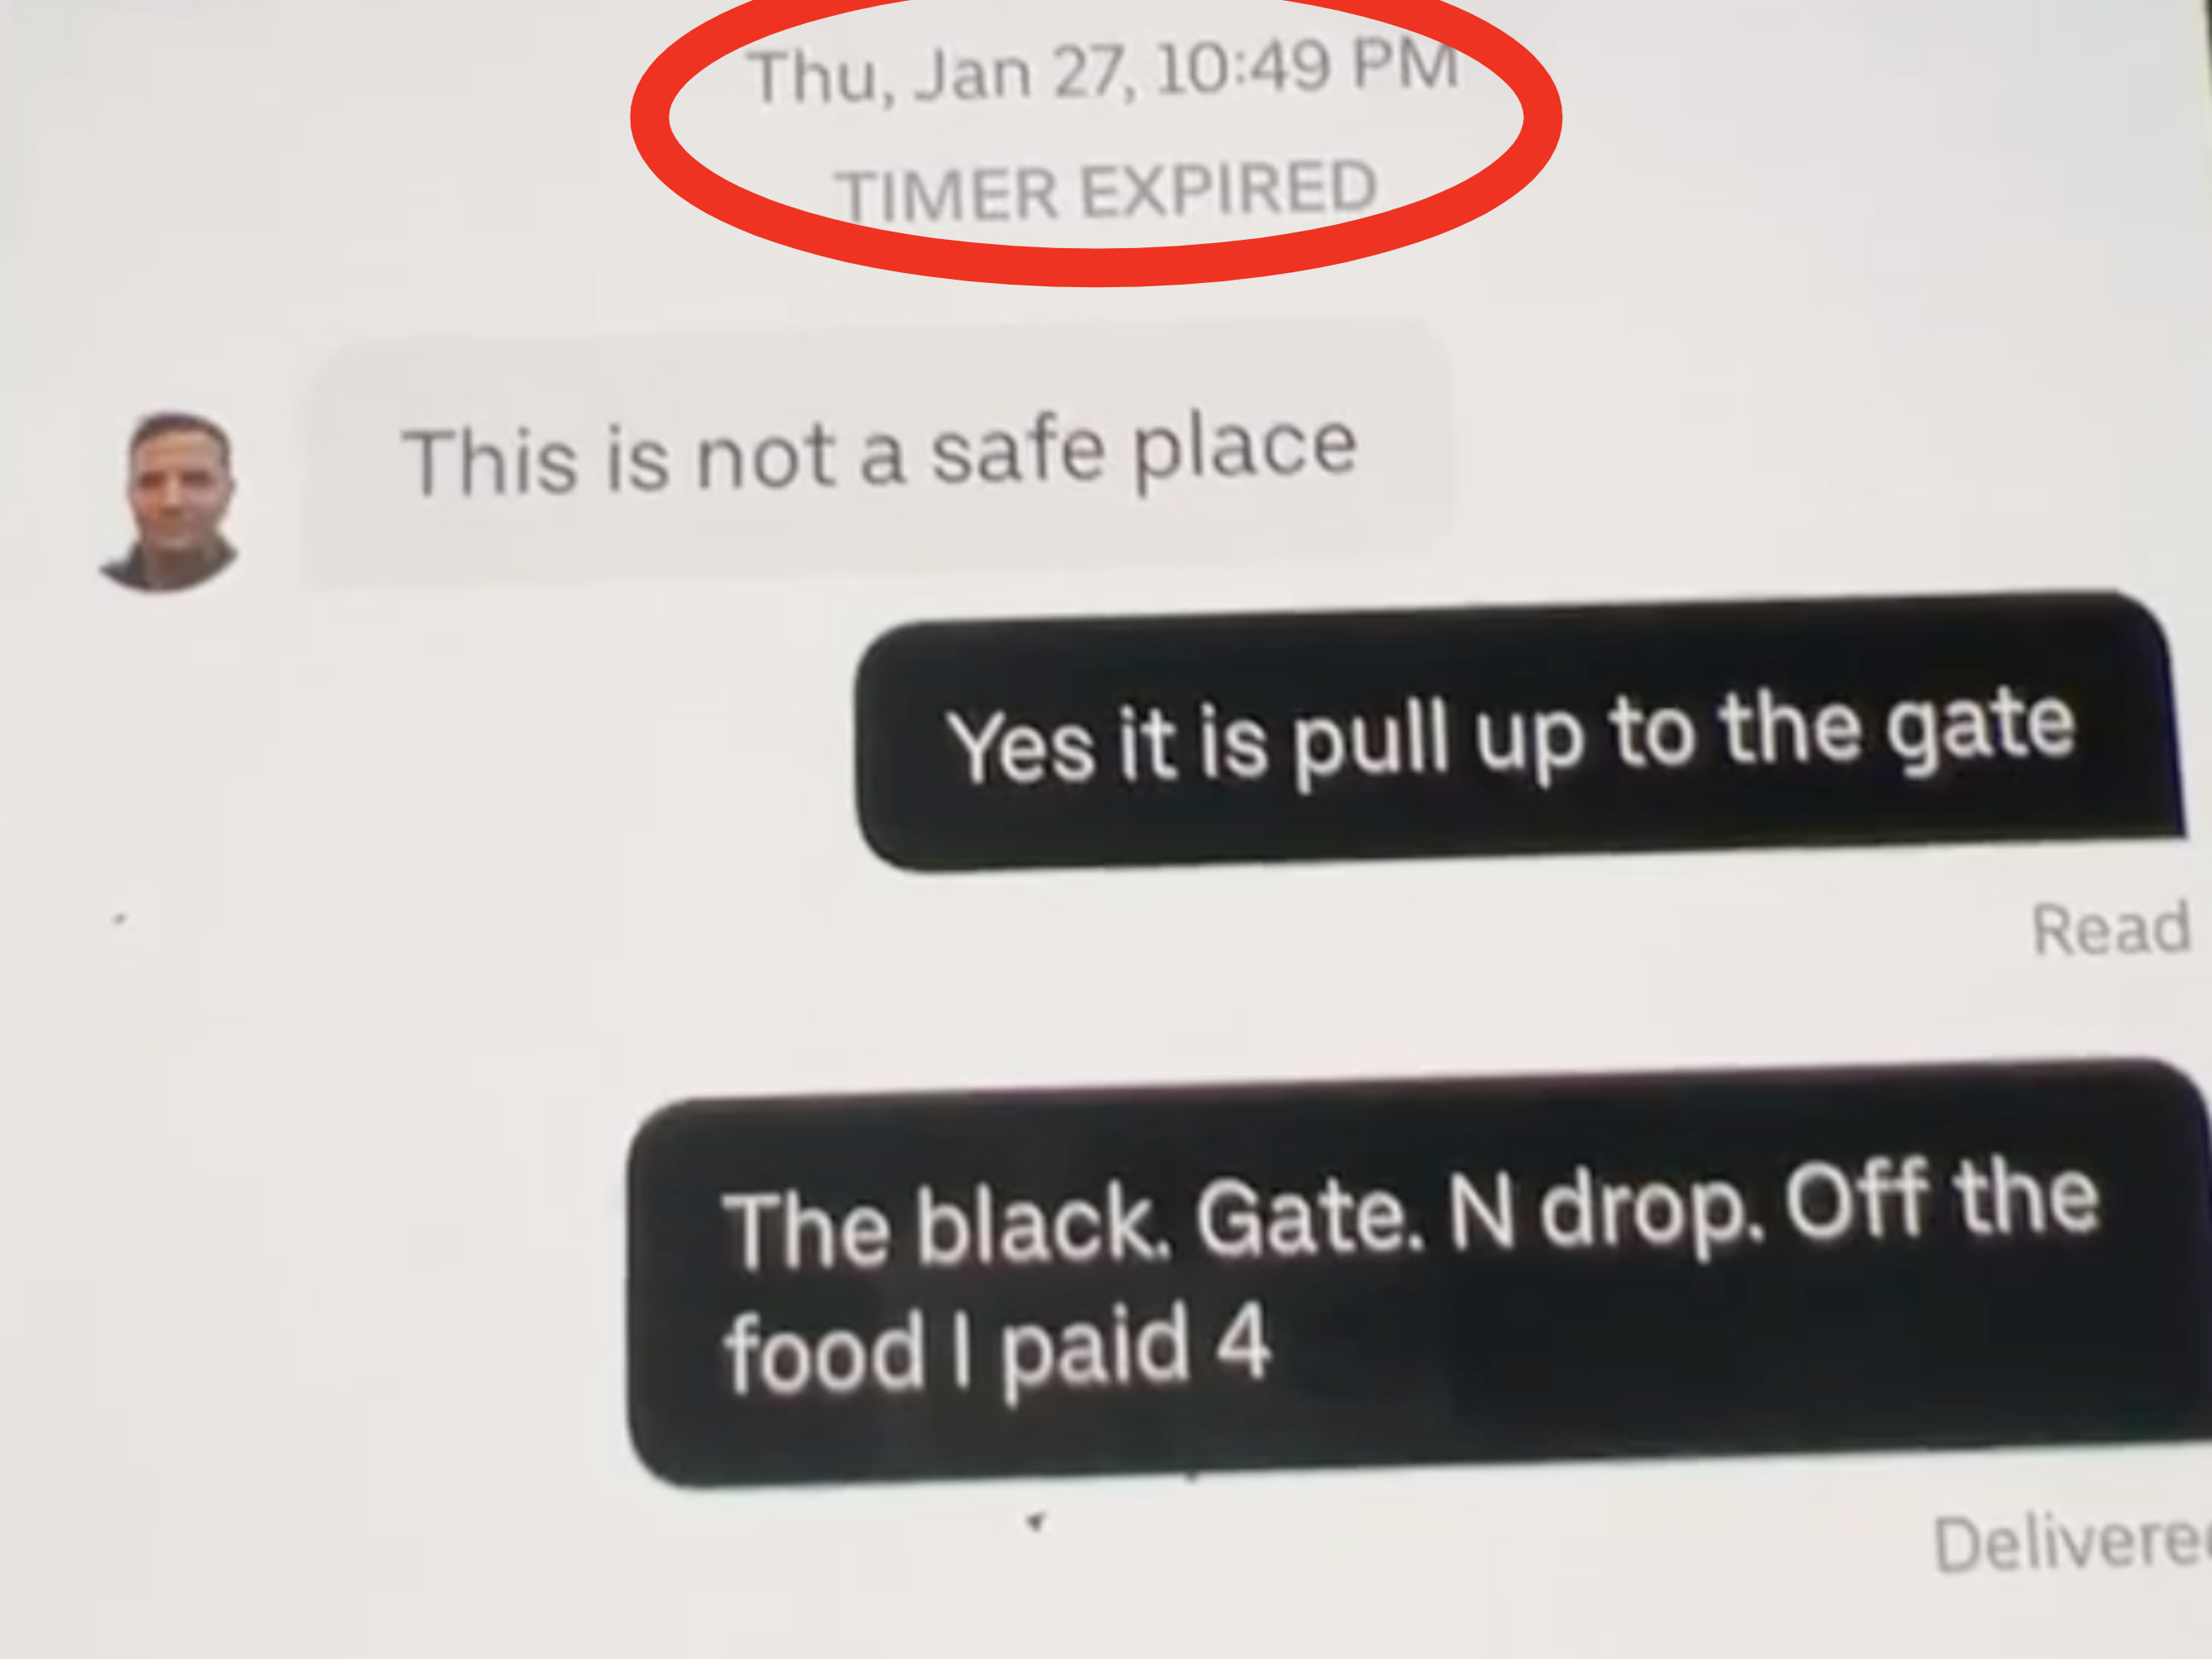 Snoop&#x27;s texts: &quot;Yes it is pull up to the gate&quot; and &quot;The black. Gate. N drop. Off the food i paid 4&quot; after deliverer texts &quot;This is not a safe place&quot;